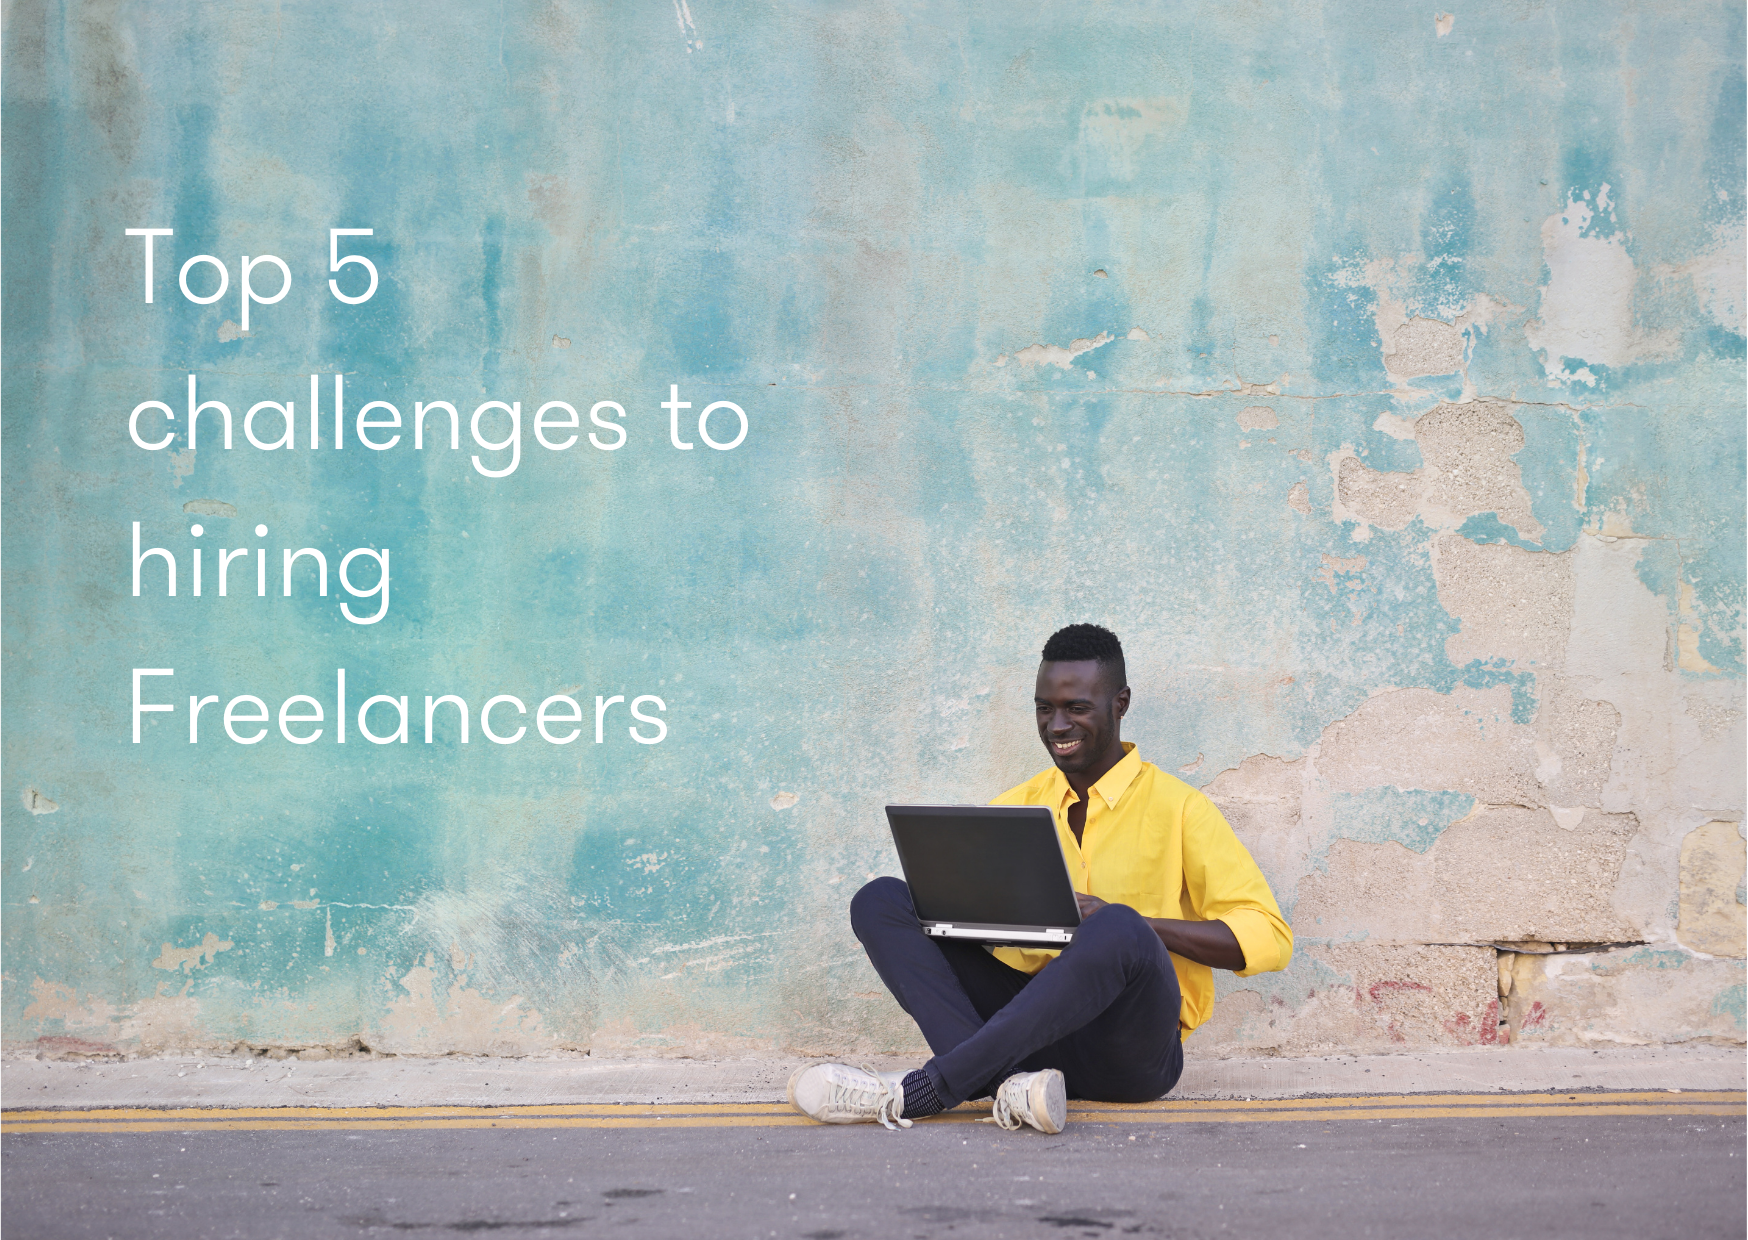 Top 5 challenges to hiring Freelancers